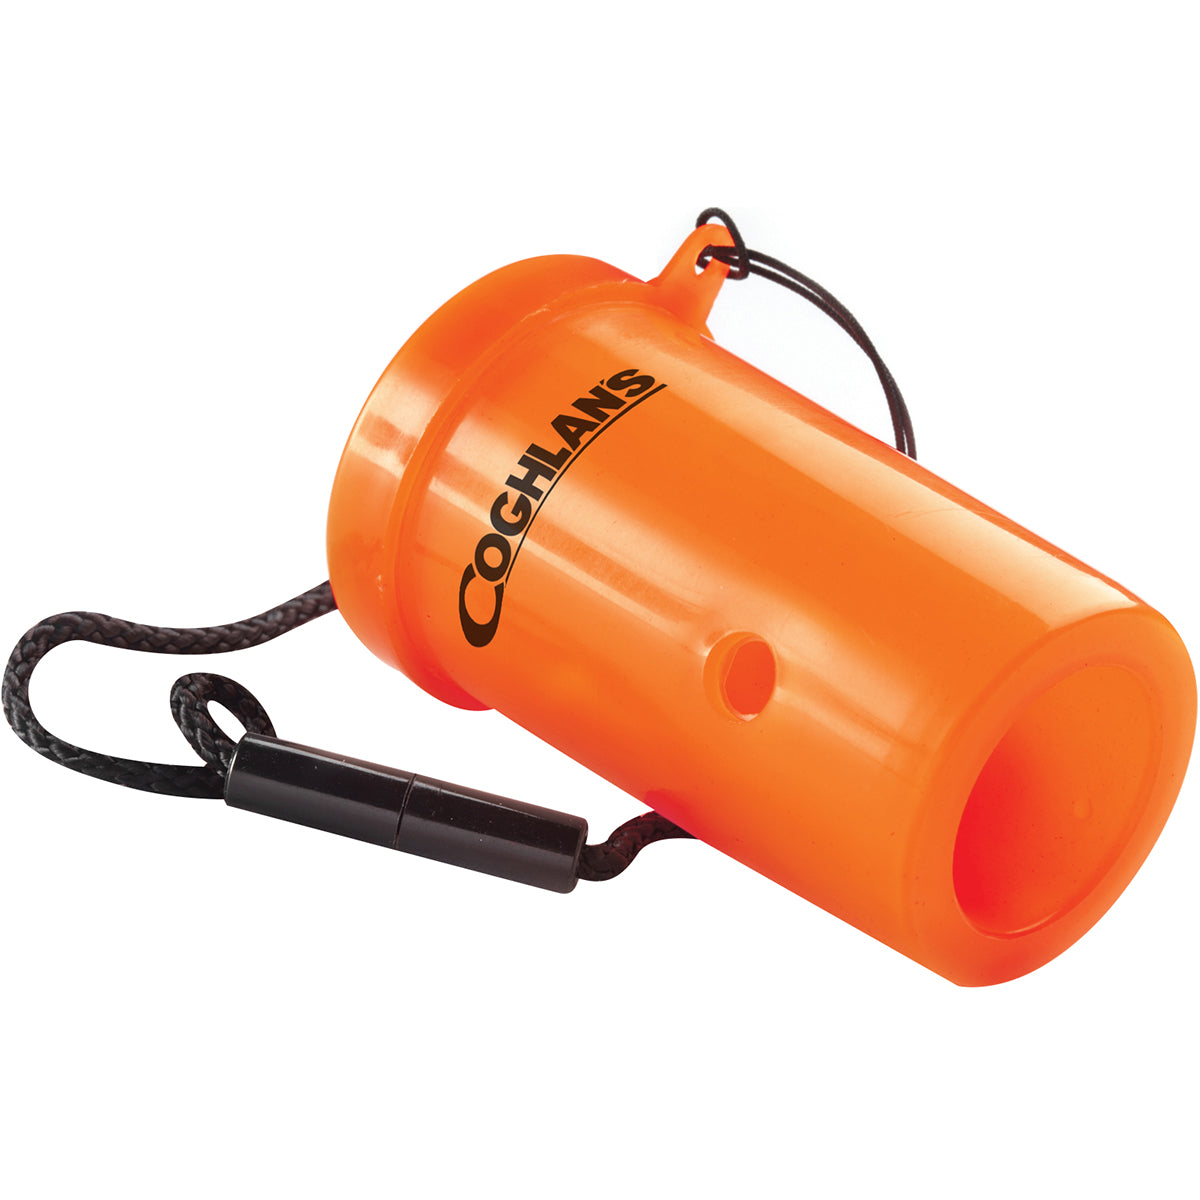 Coghlan's Emergency Survival Horn Animal Alert for Hiking Camping Rescue Whistle Coghlan's